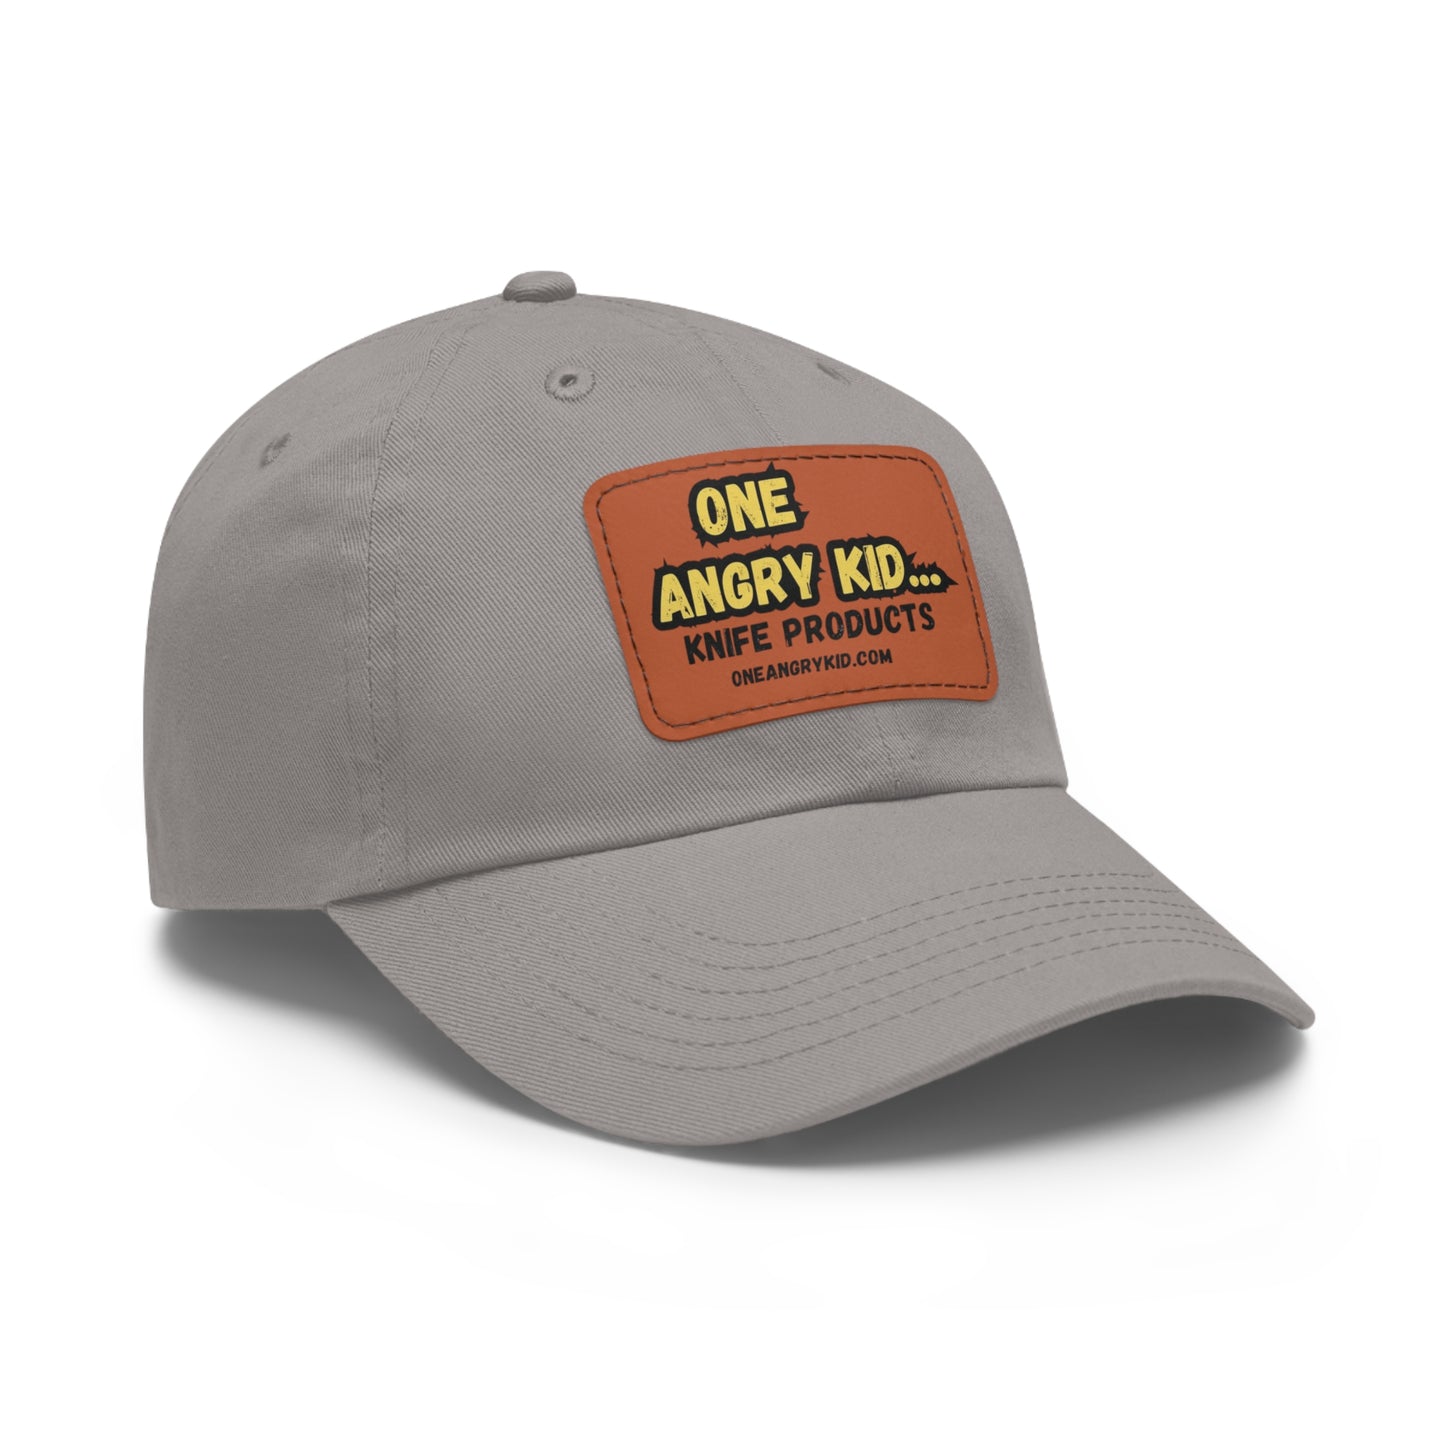 "One Angry Kid.." Dad Hat with Leather Patch (Rectangle)